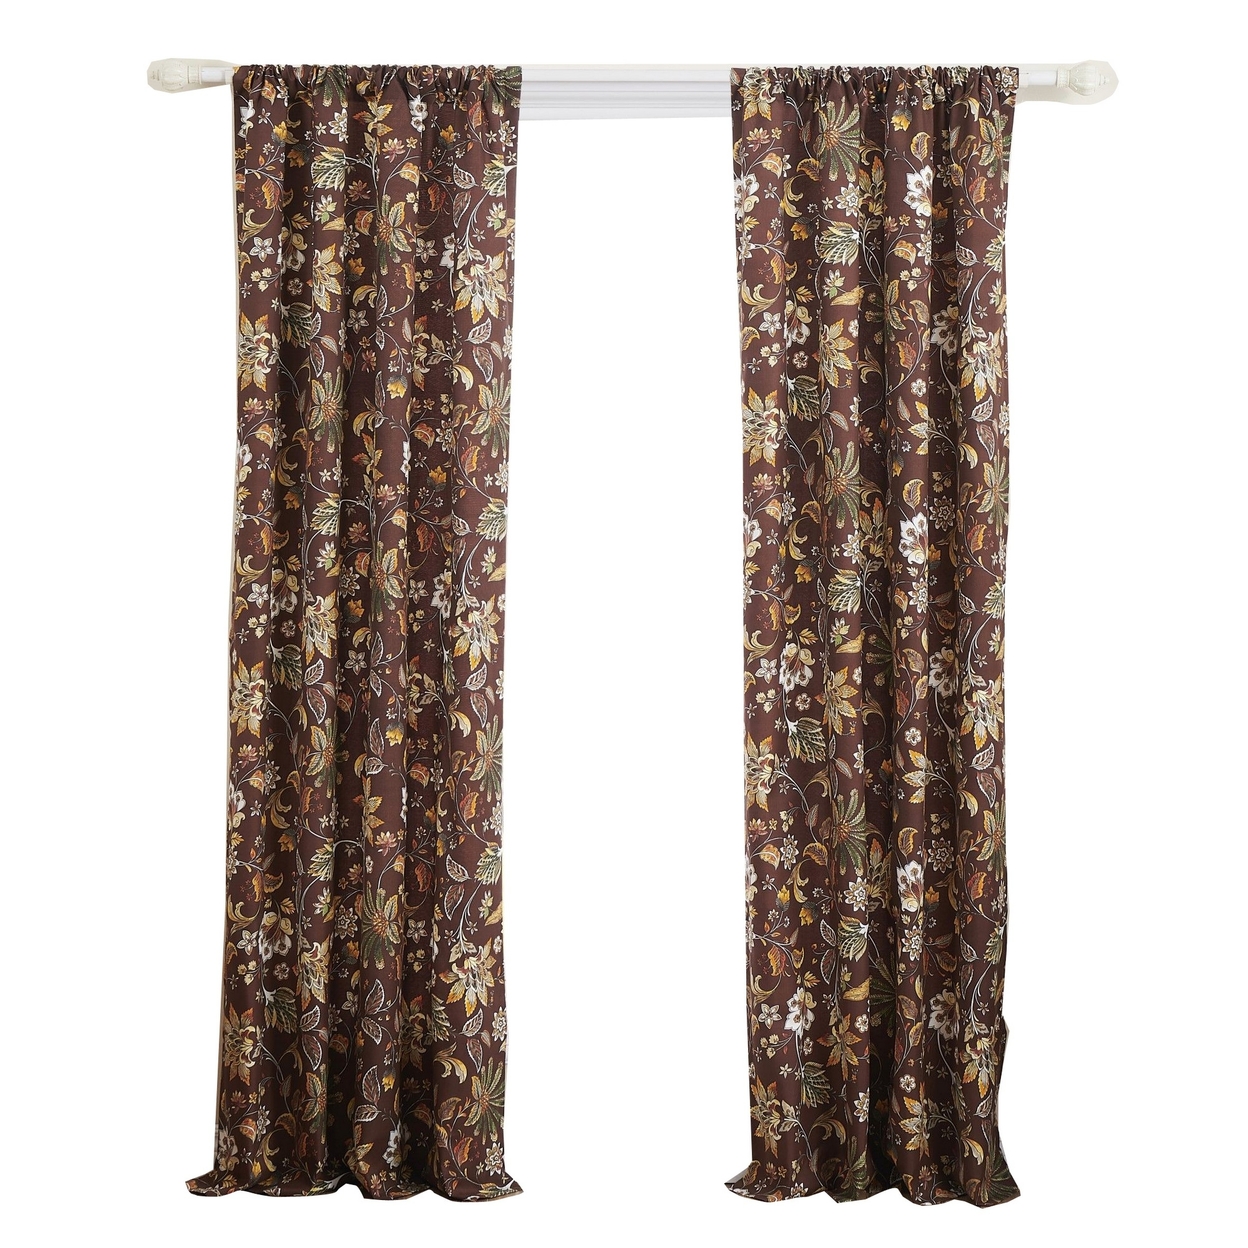 Athens 84 Inch Window Panel Curtain, Brown Microfiber Polyester, Jacobean